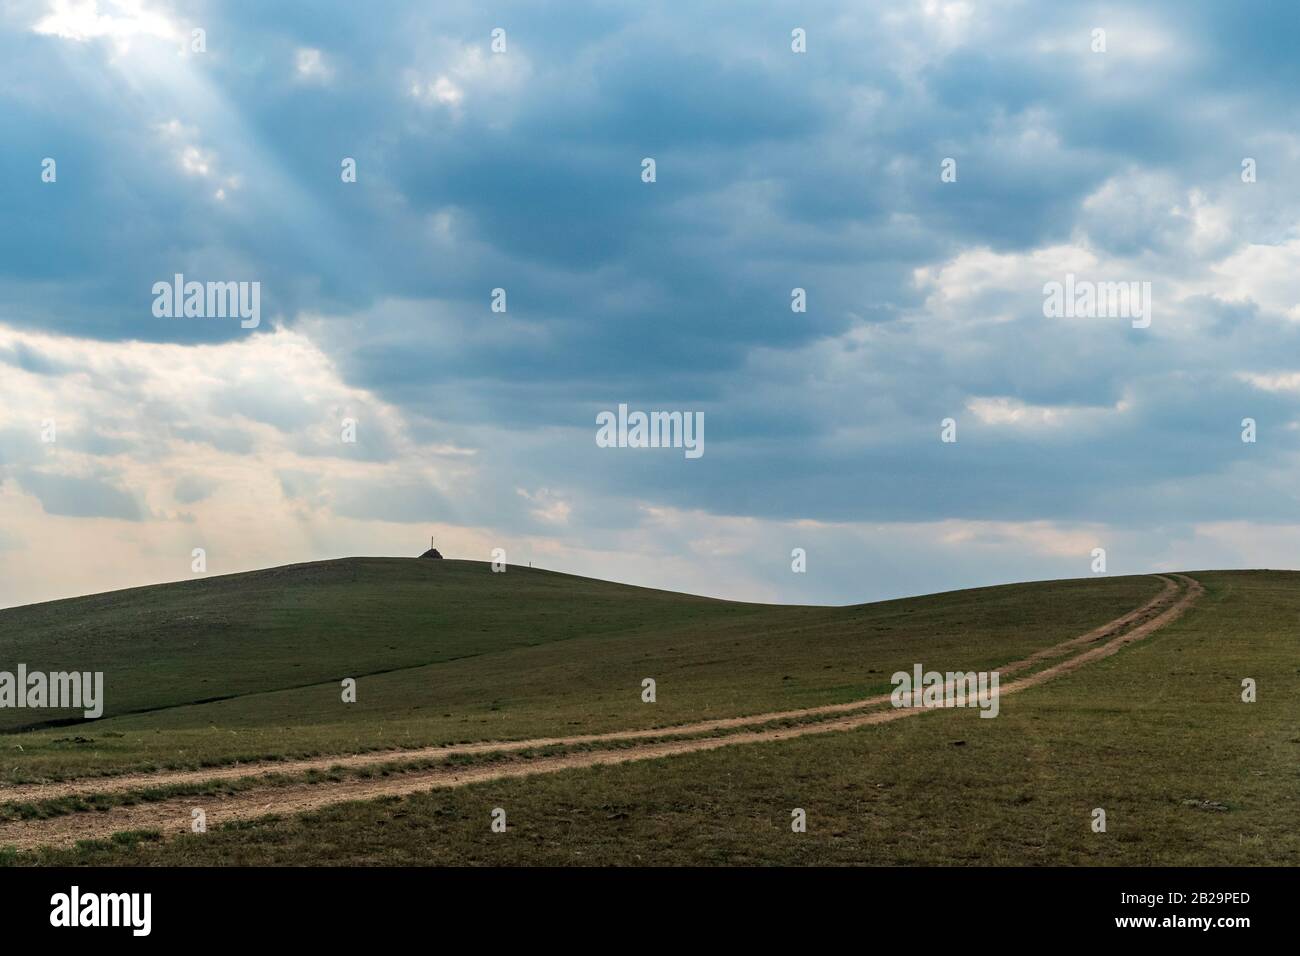 Steppe and green hill, Taipusi Banner, Inner Mongolia, China Stock Photo